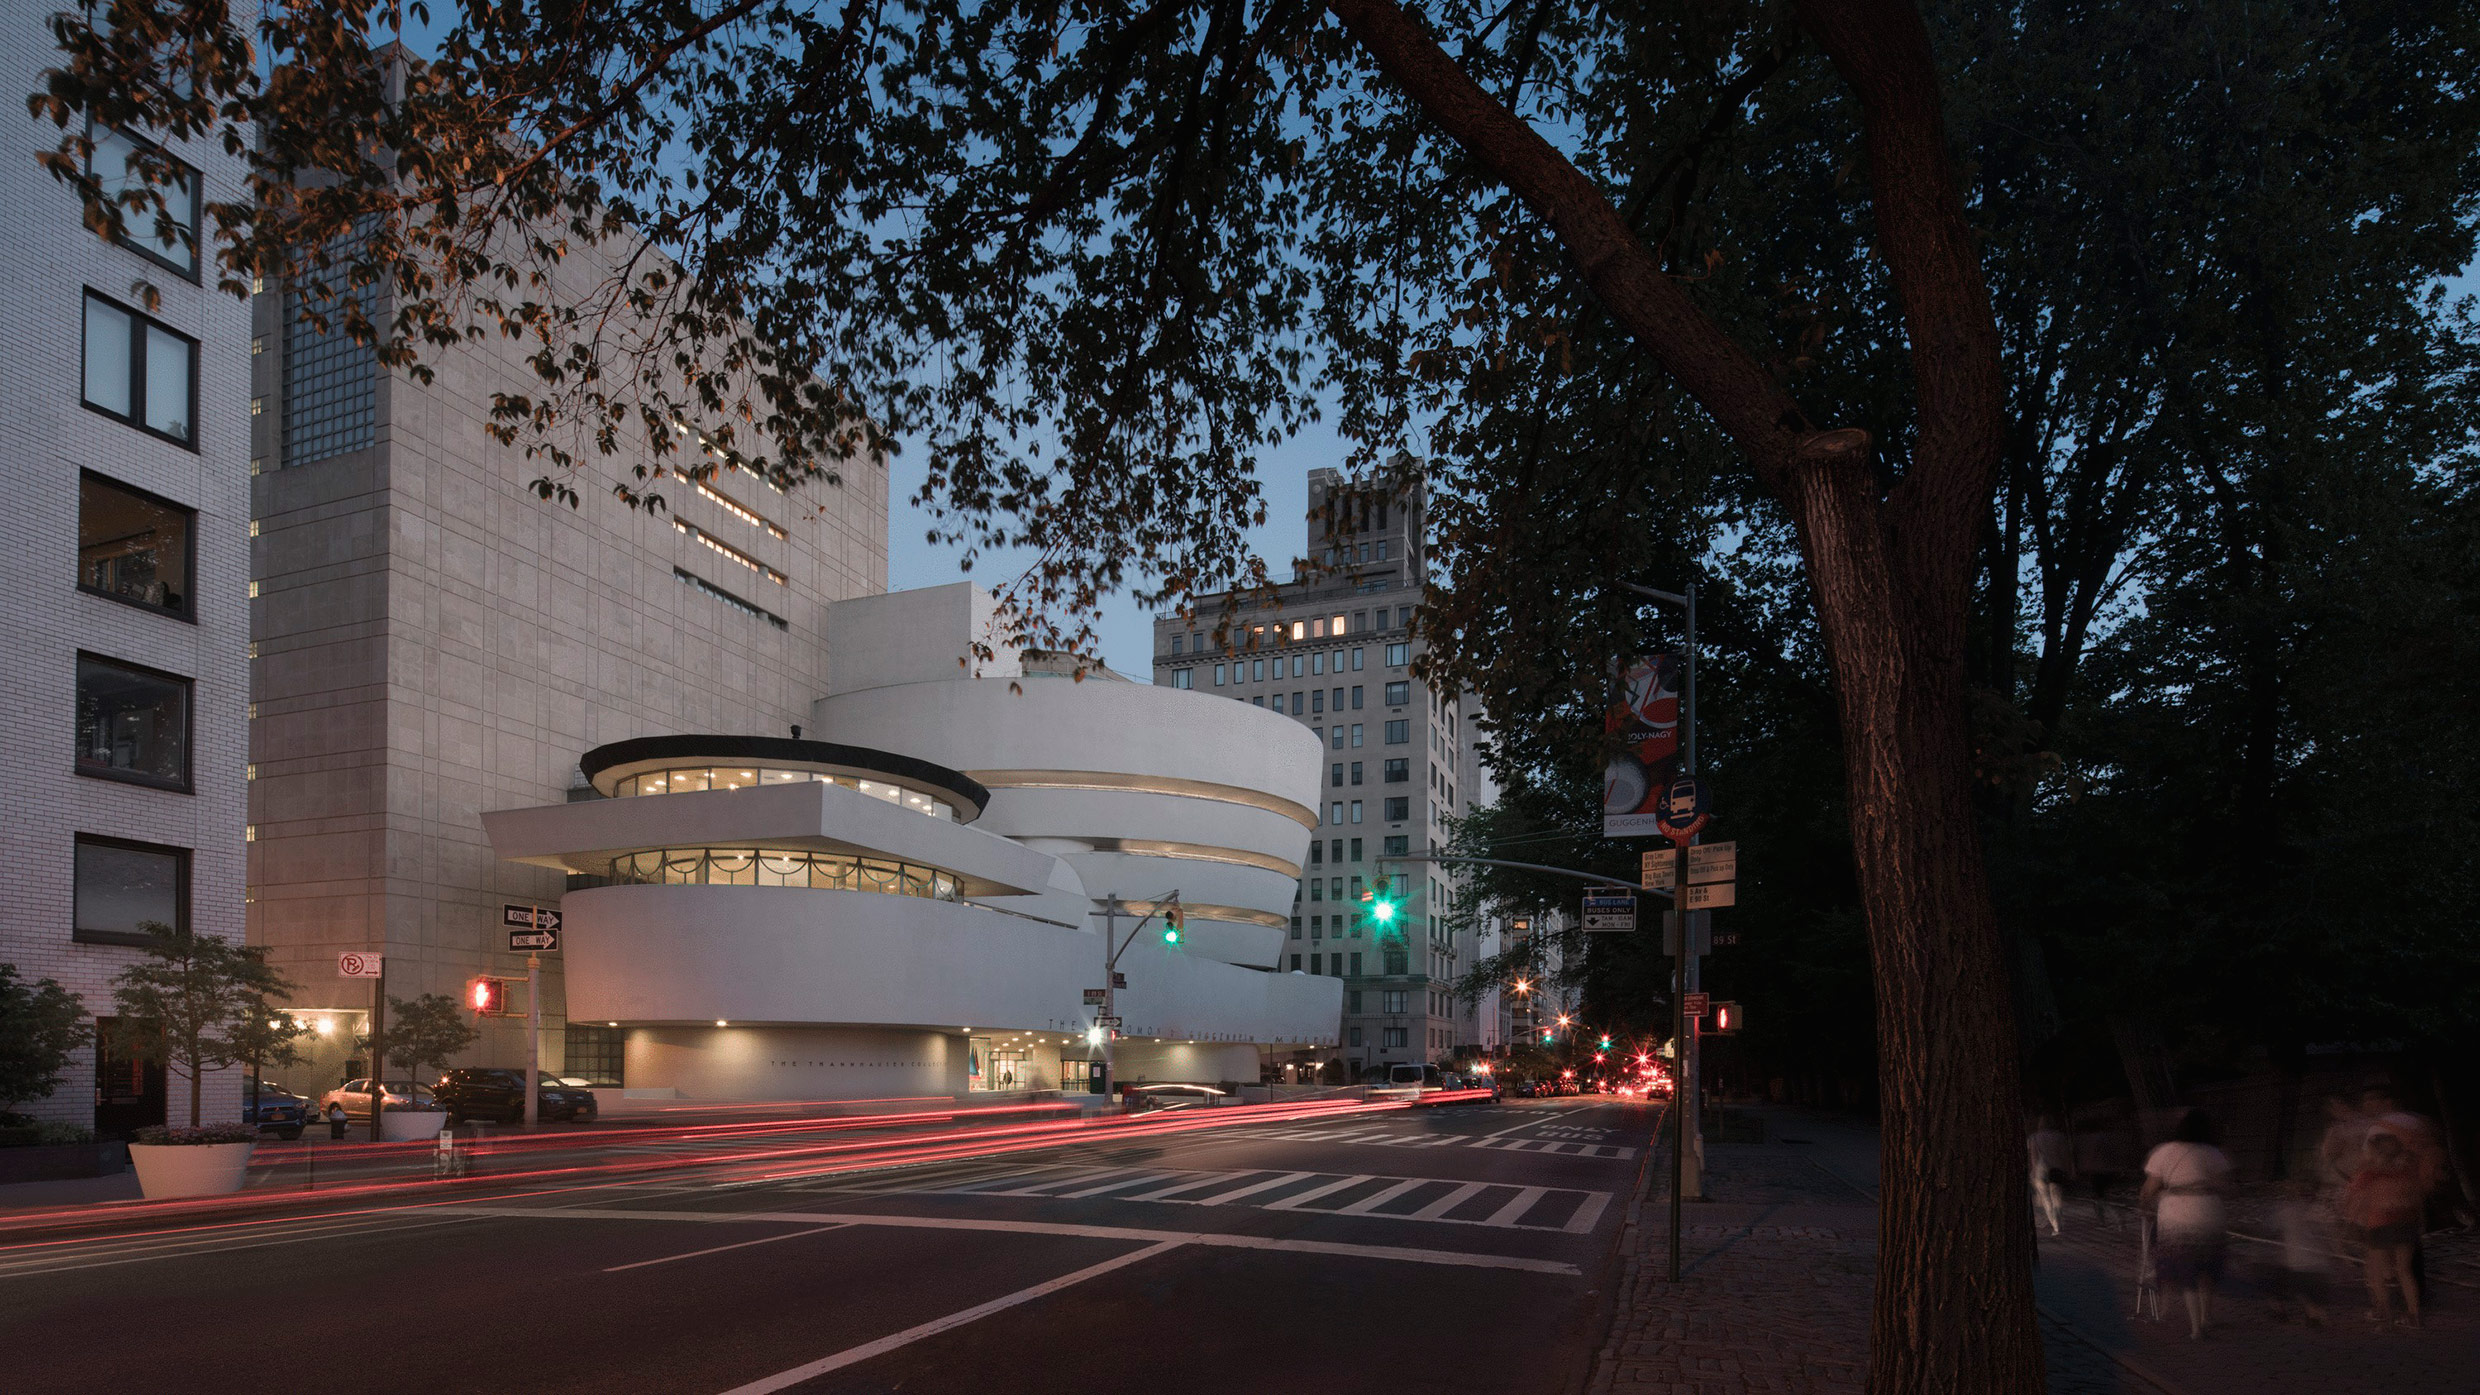 A view of the Solomon R. Guggenheim Museum in New York City at late dusk.